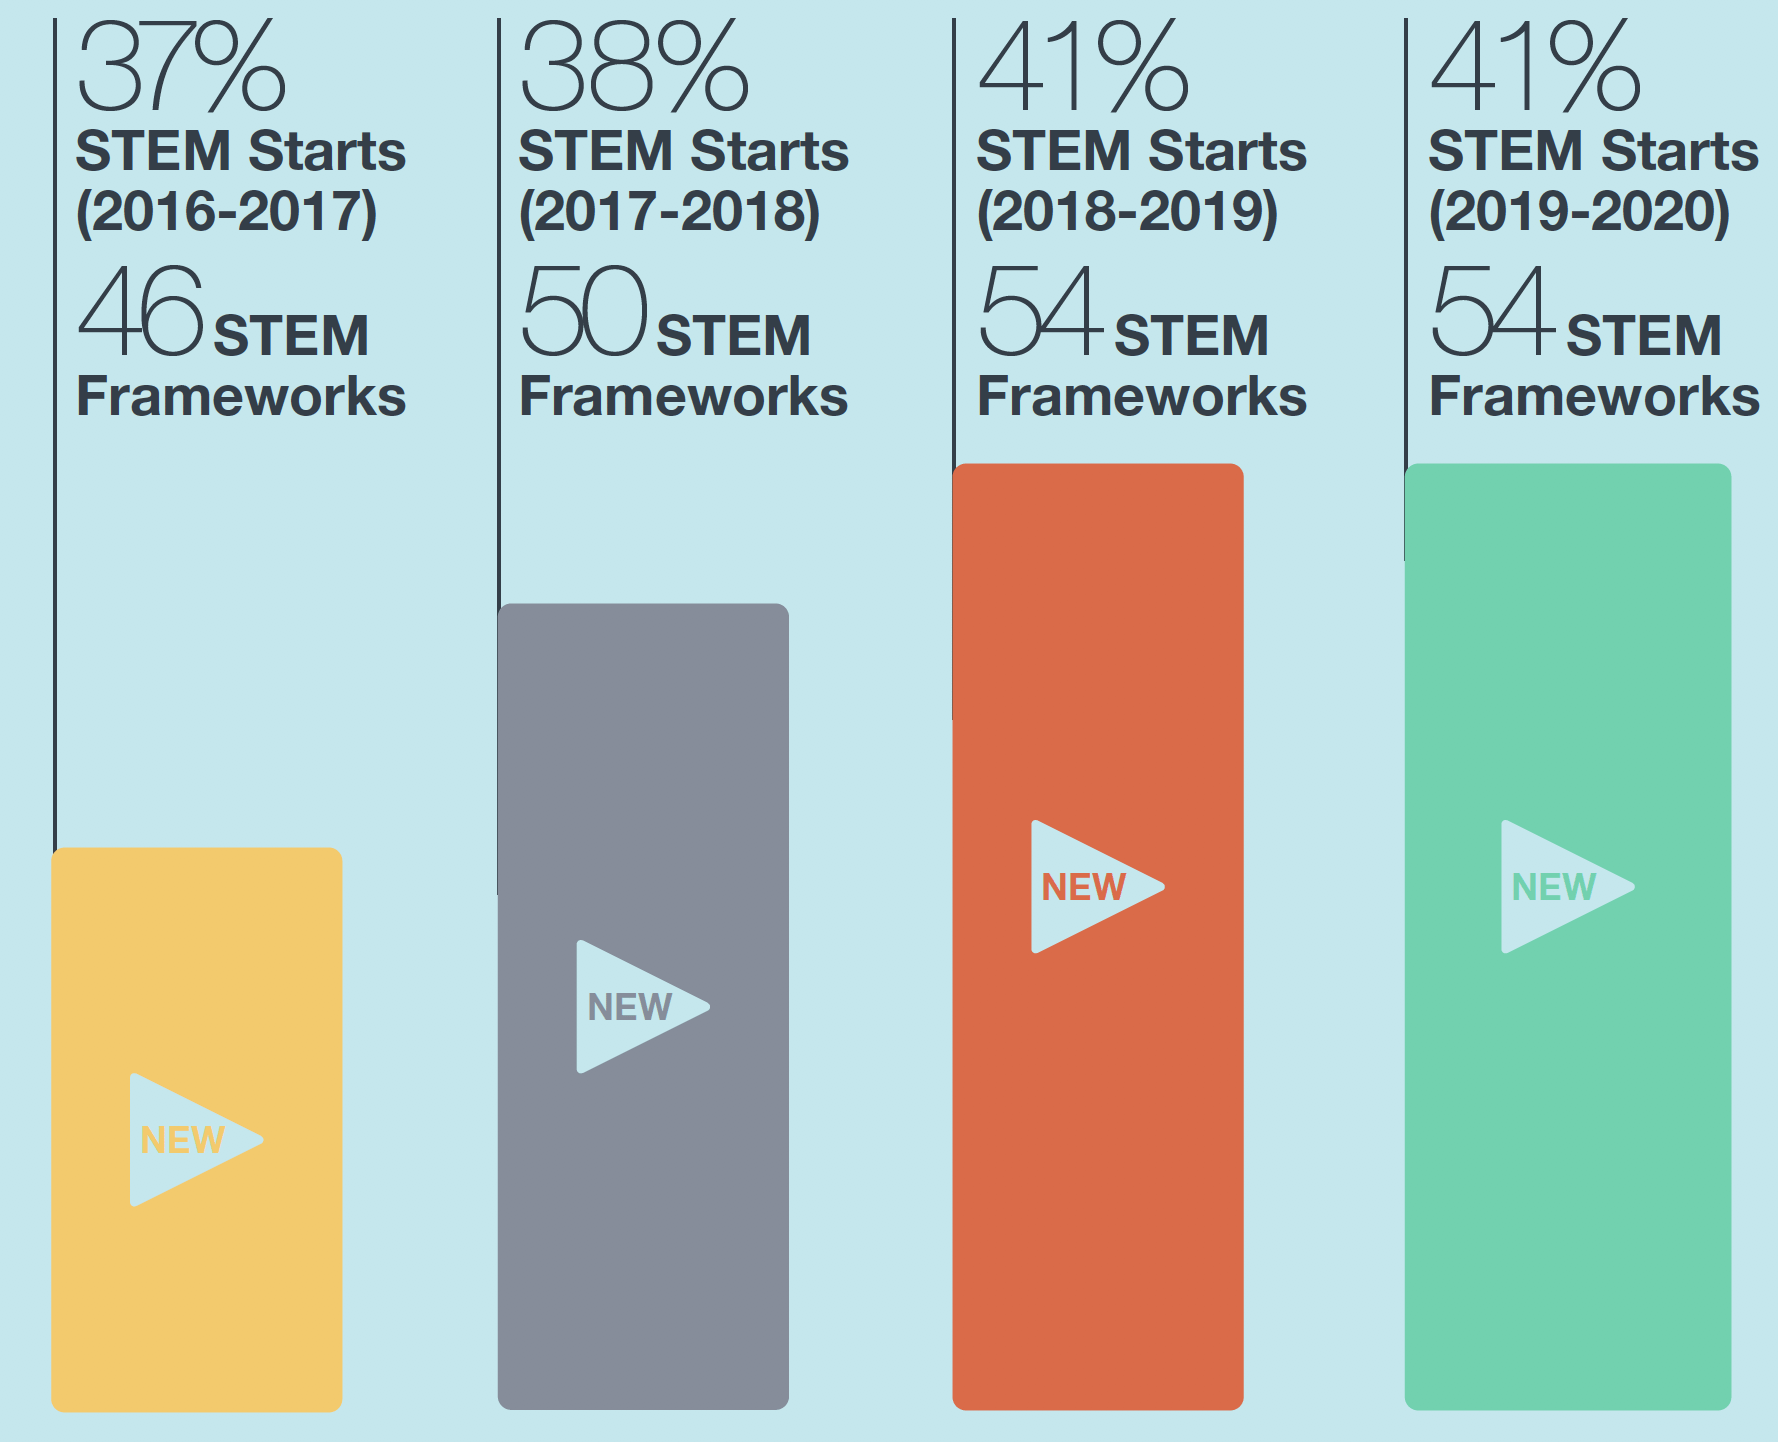 In the year 2016 to 2017 37% of Modern Apprenticeships were STEM Starts over 46 STEM Frameworks, in the year 2017 to 2018 this increased to 38% STEM Starts over 50 STEM Frameworks, in the year 2018 to 2019 this increased further to 41% STEM Starts over 54 STEM frameworks, and in the year 2019 to 2020 the number of STEM Starts and STEM Frameworks remained the same.